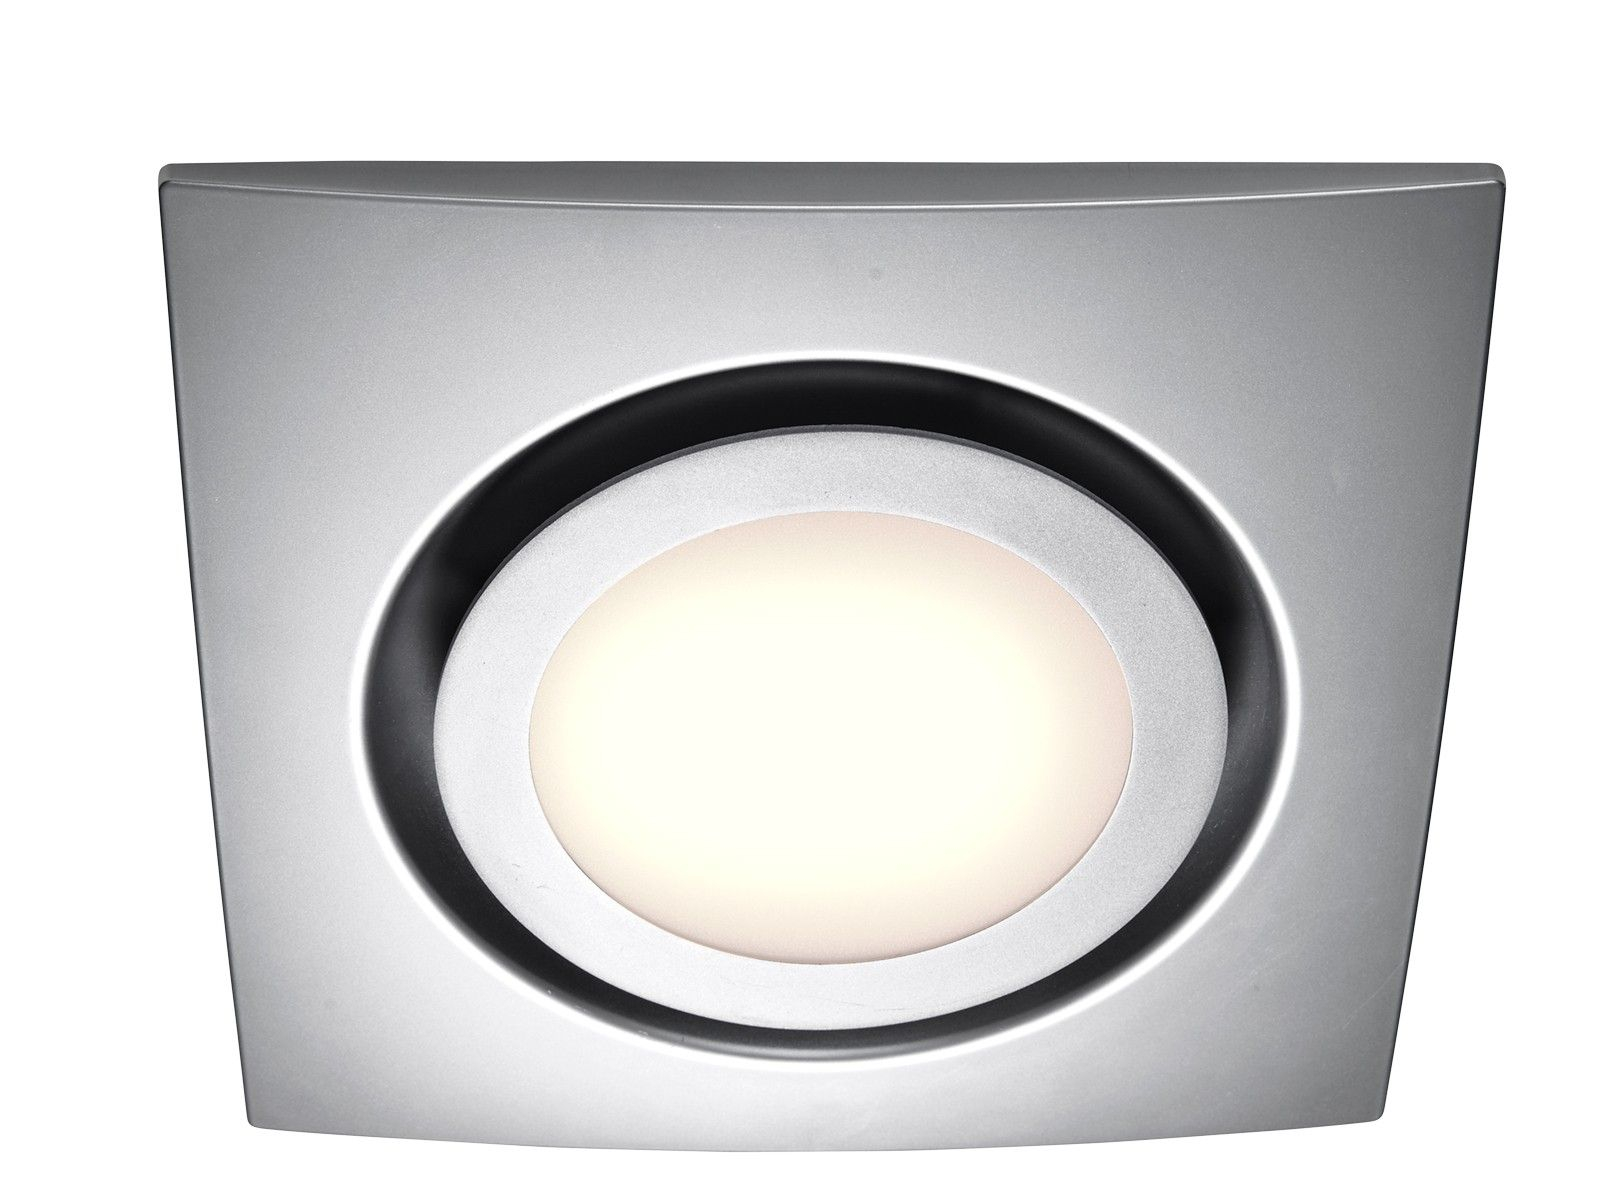 Silver Exhaust Fan With Led Light Bathroom Exhaust Fan pertaining to proportions 1600 X 1200